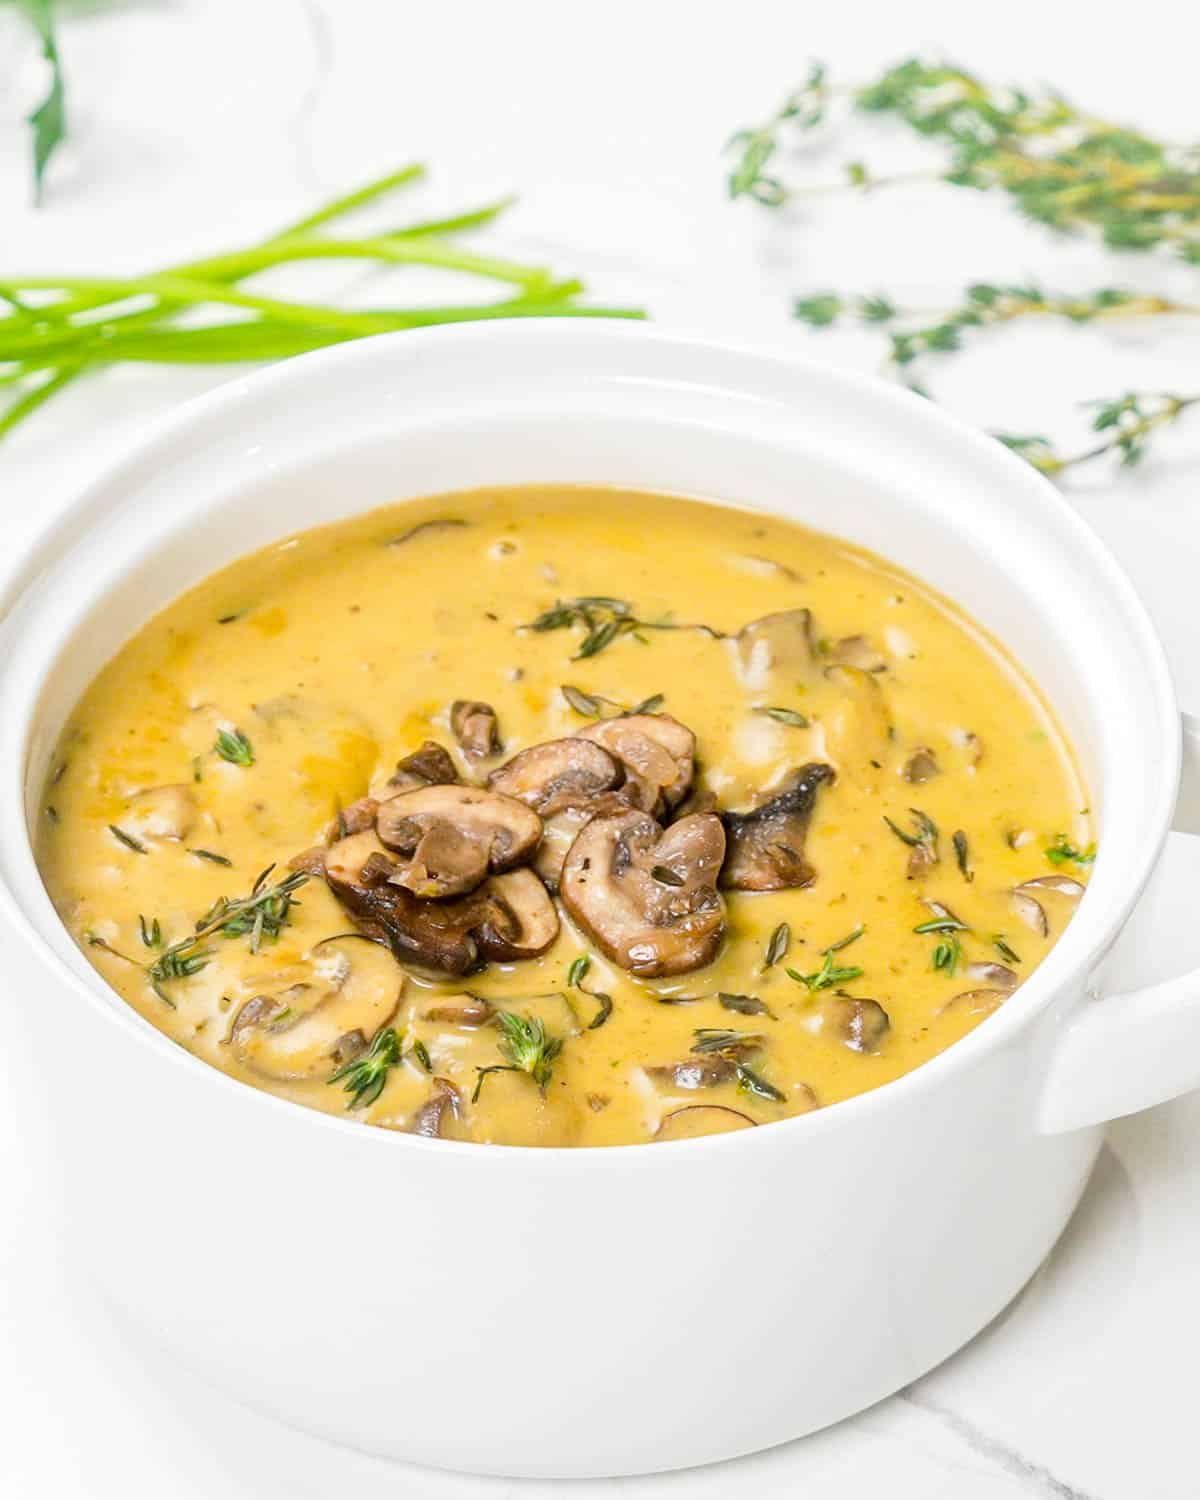 cream of mushroom soup garnished with sauteed mushrooms in a white bowl.